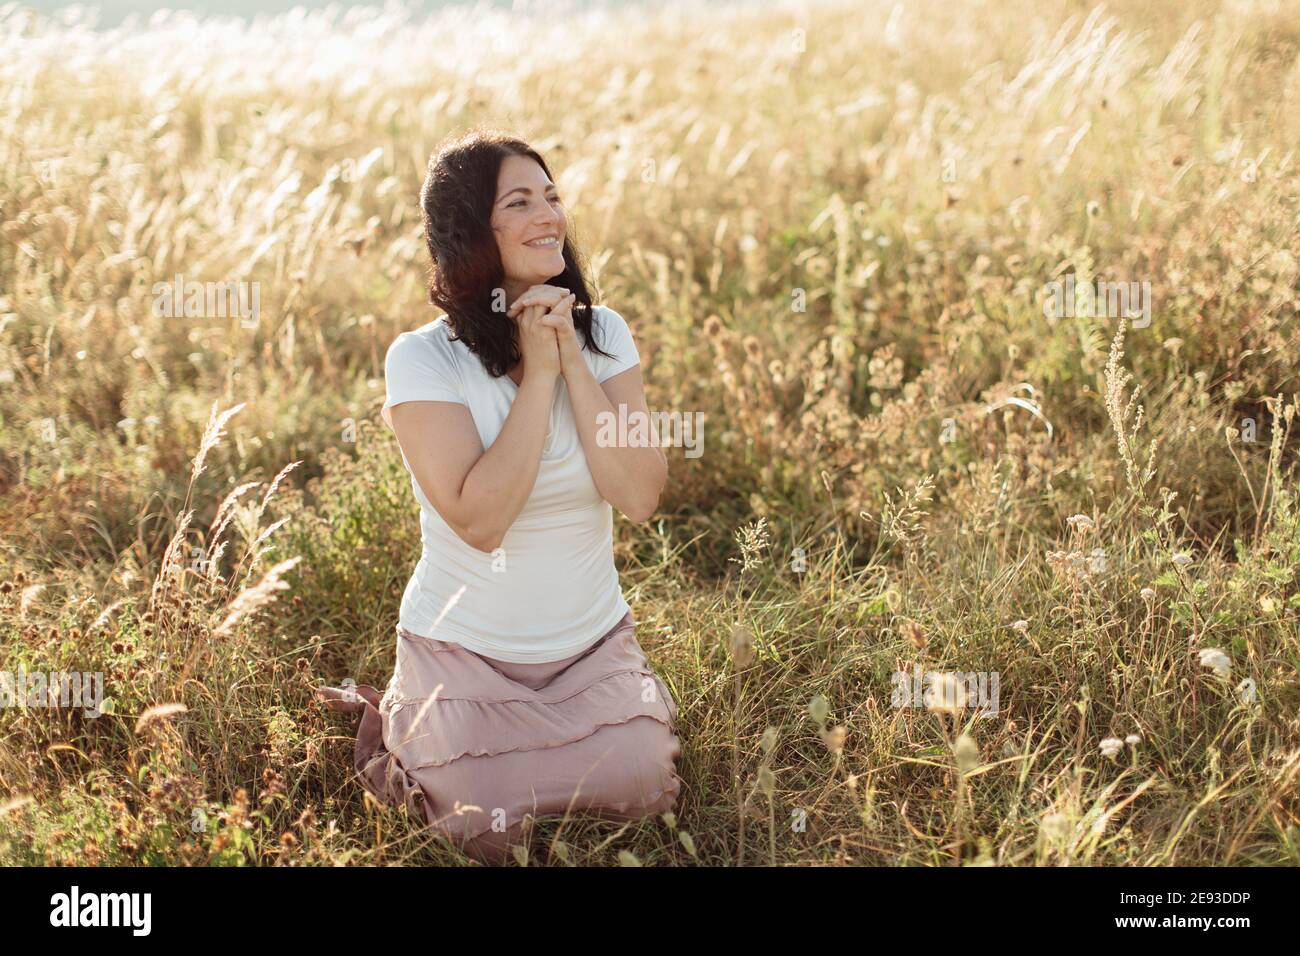 Happy woman with a big smile kneeling in a grass Stock Photo